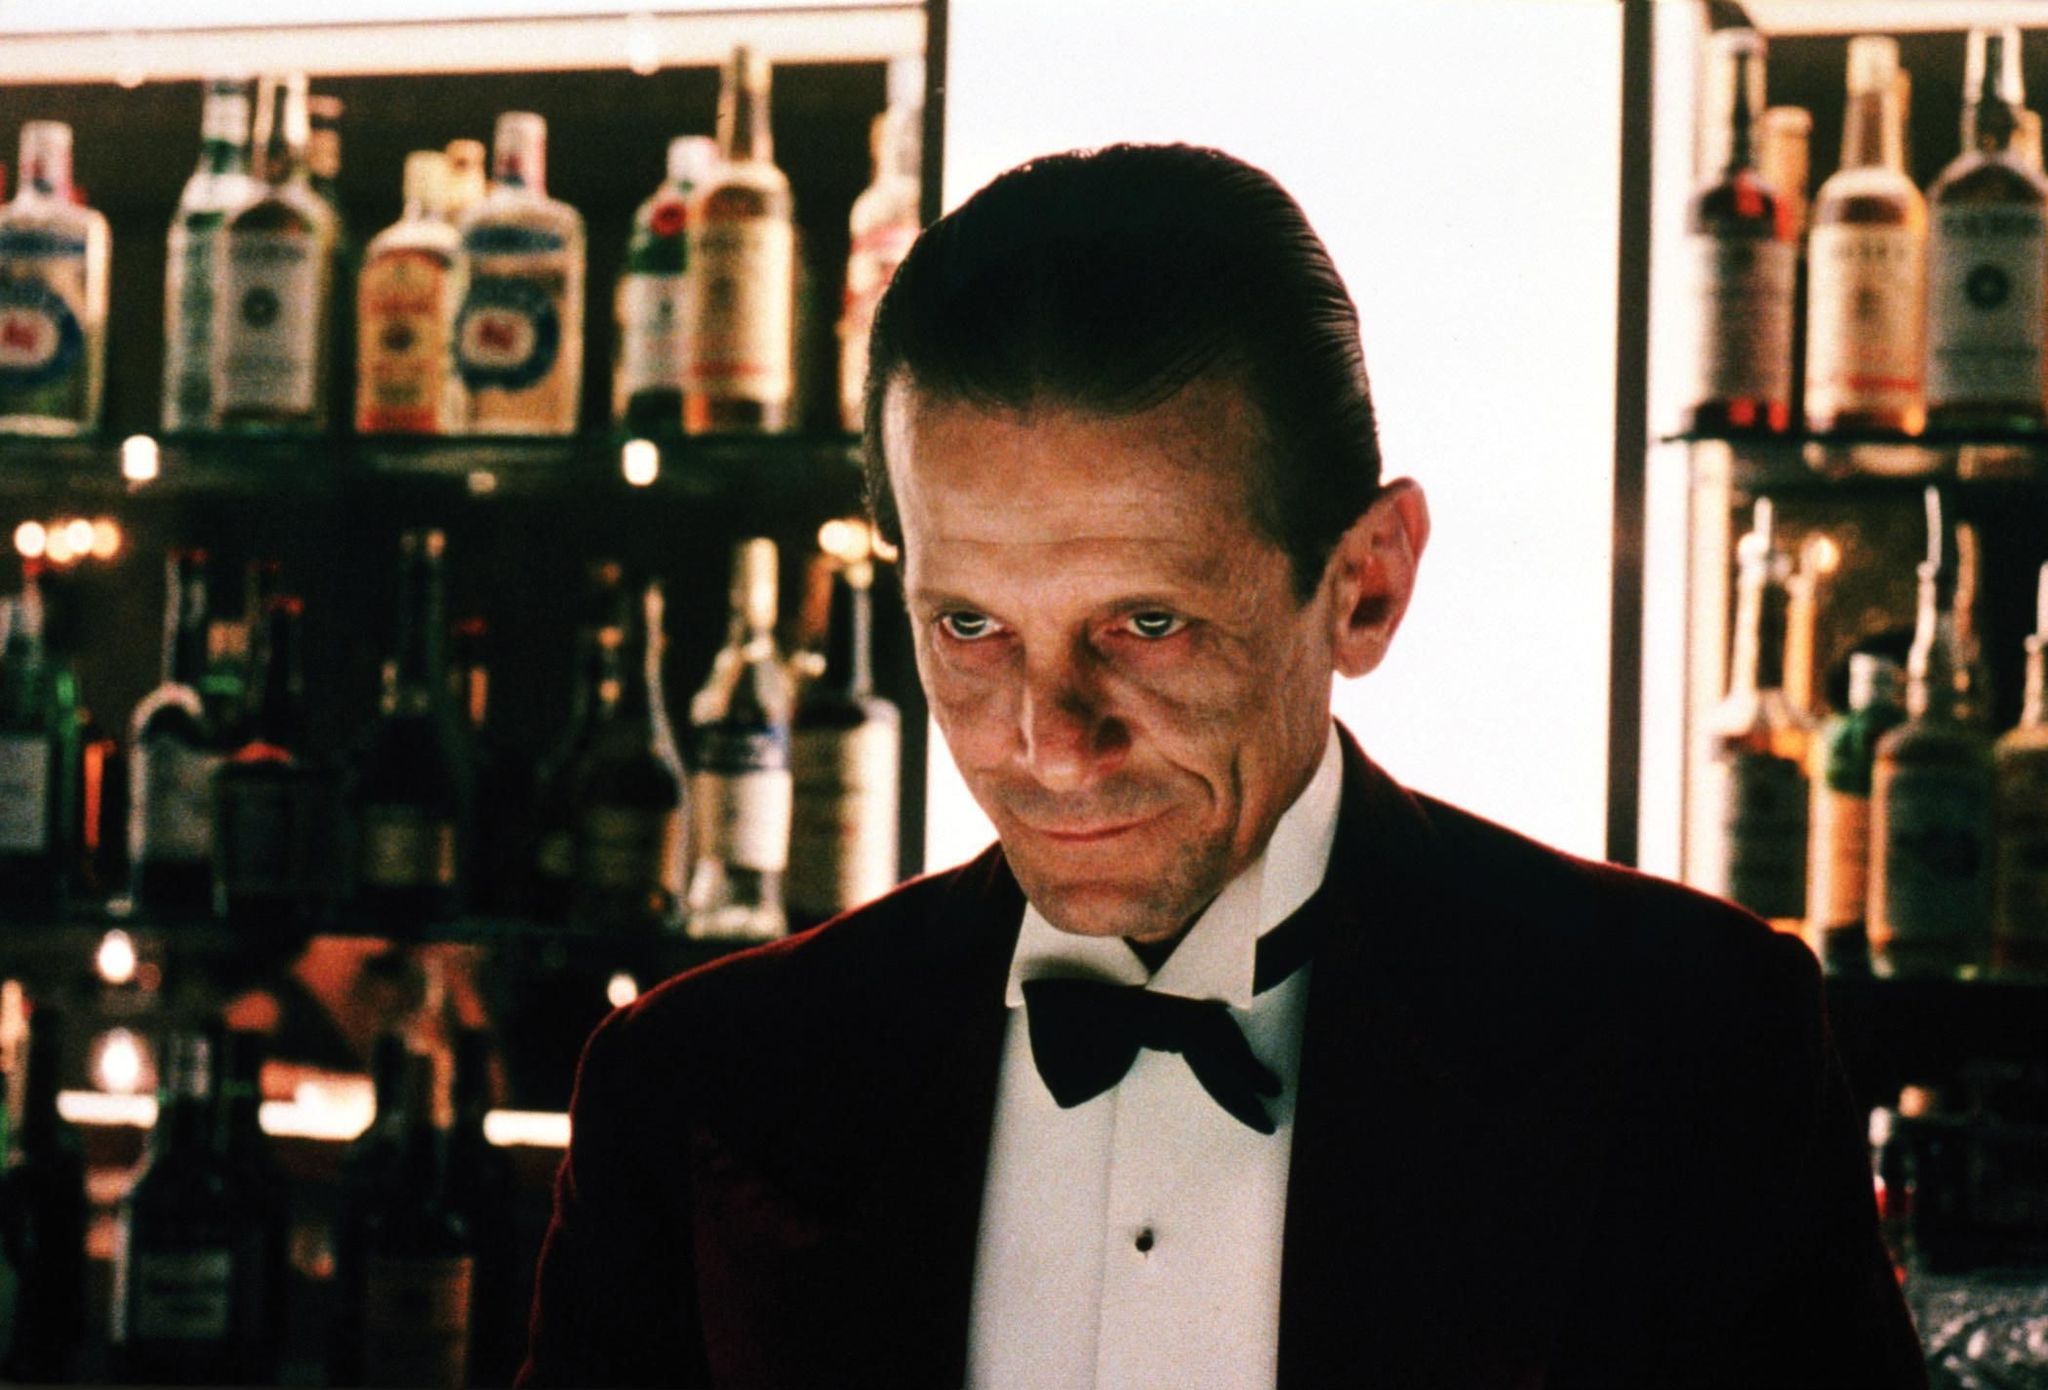 actor Joe Turkel, who appeared in The Shining and Blade Runner, passed away at 94